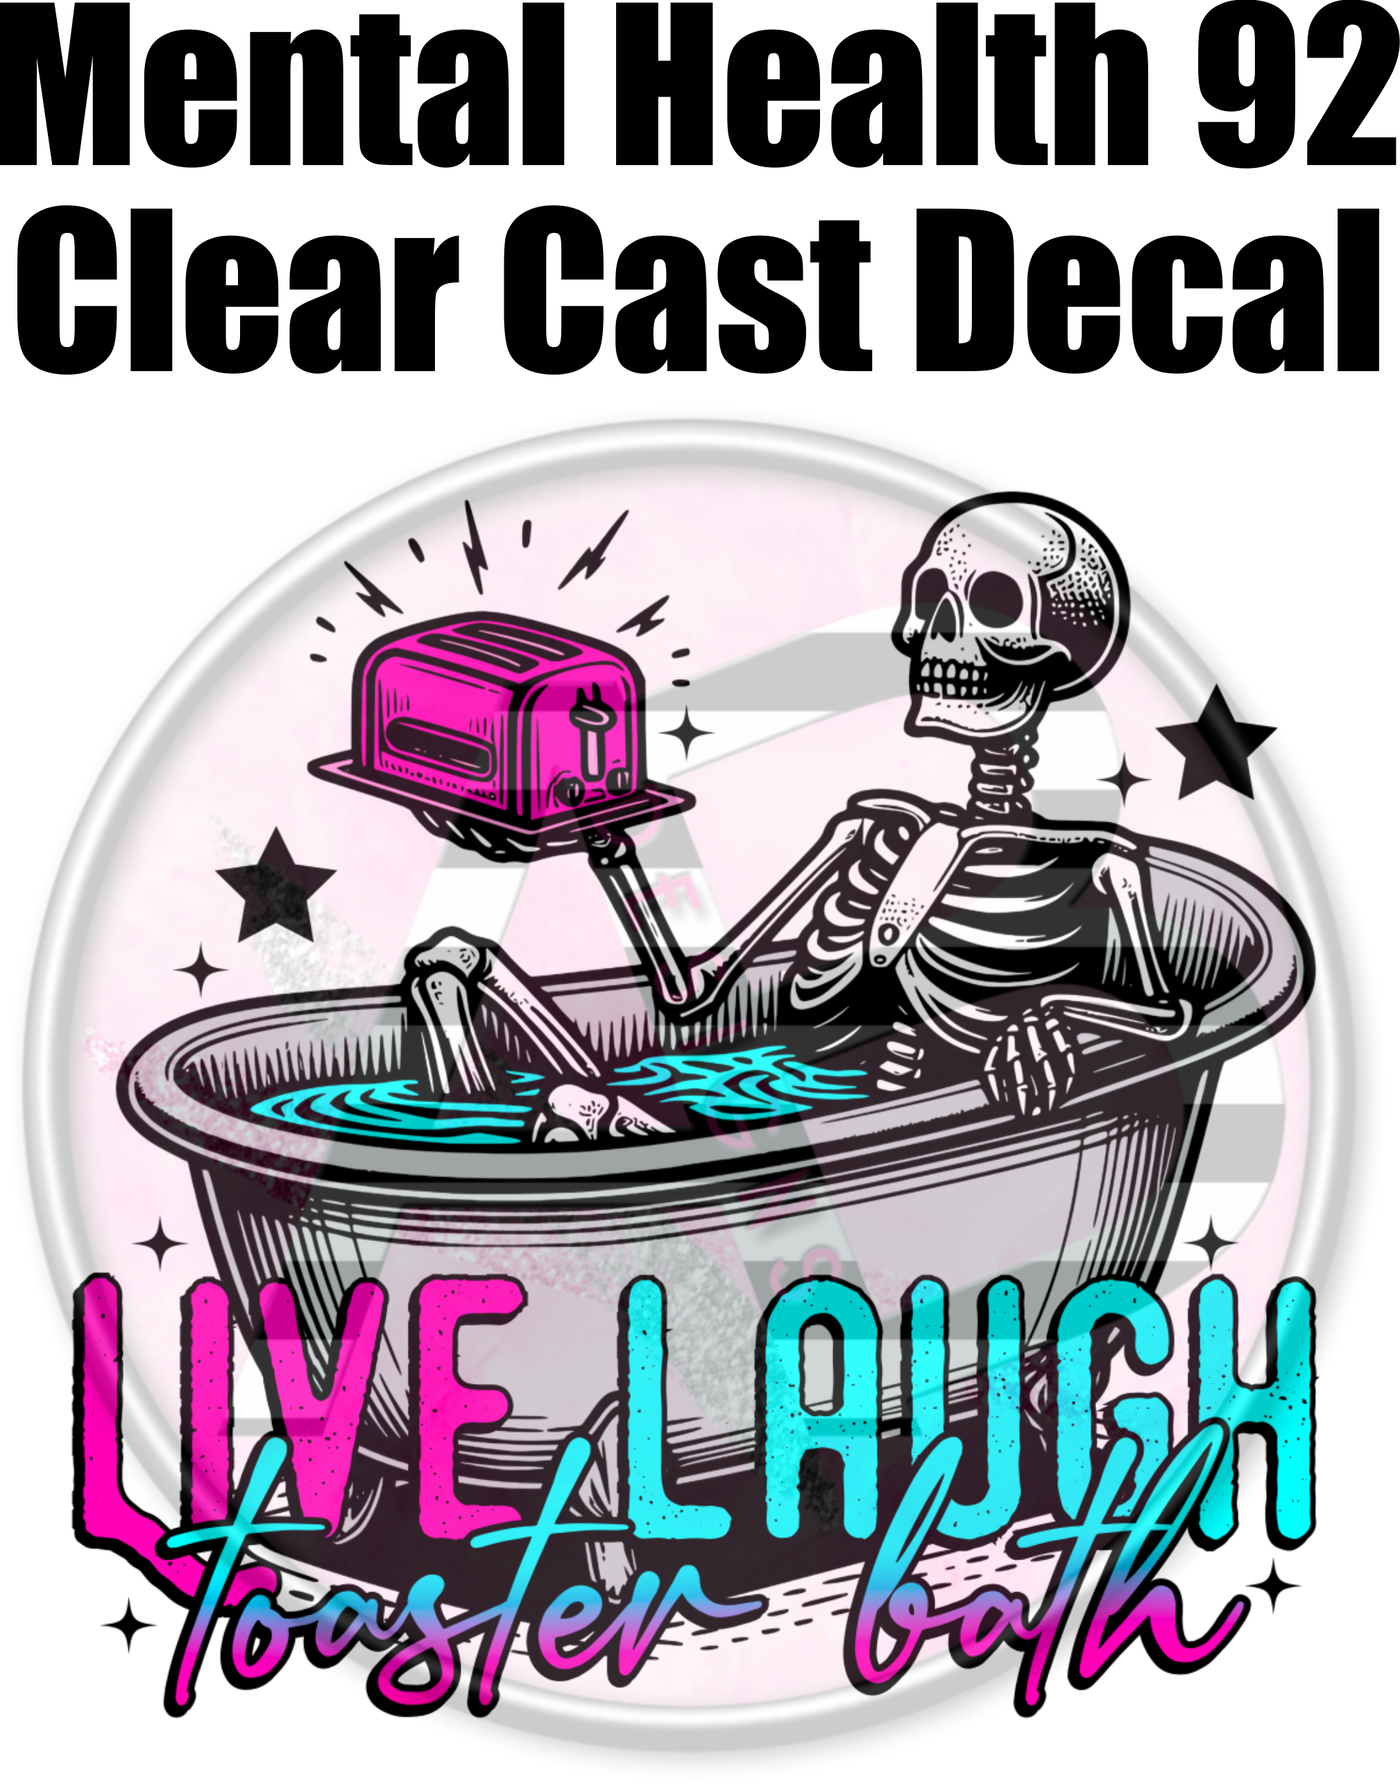 Mental Health 92 - Clear Cast Decal-476